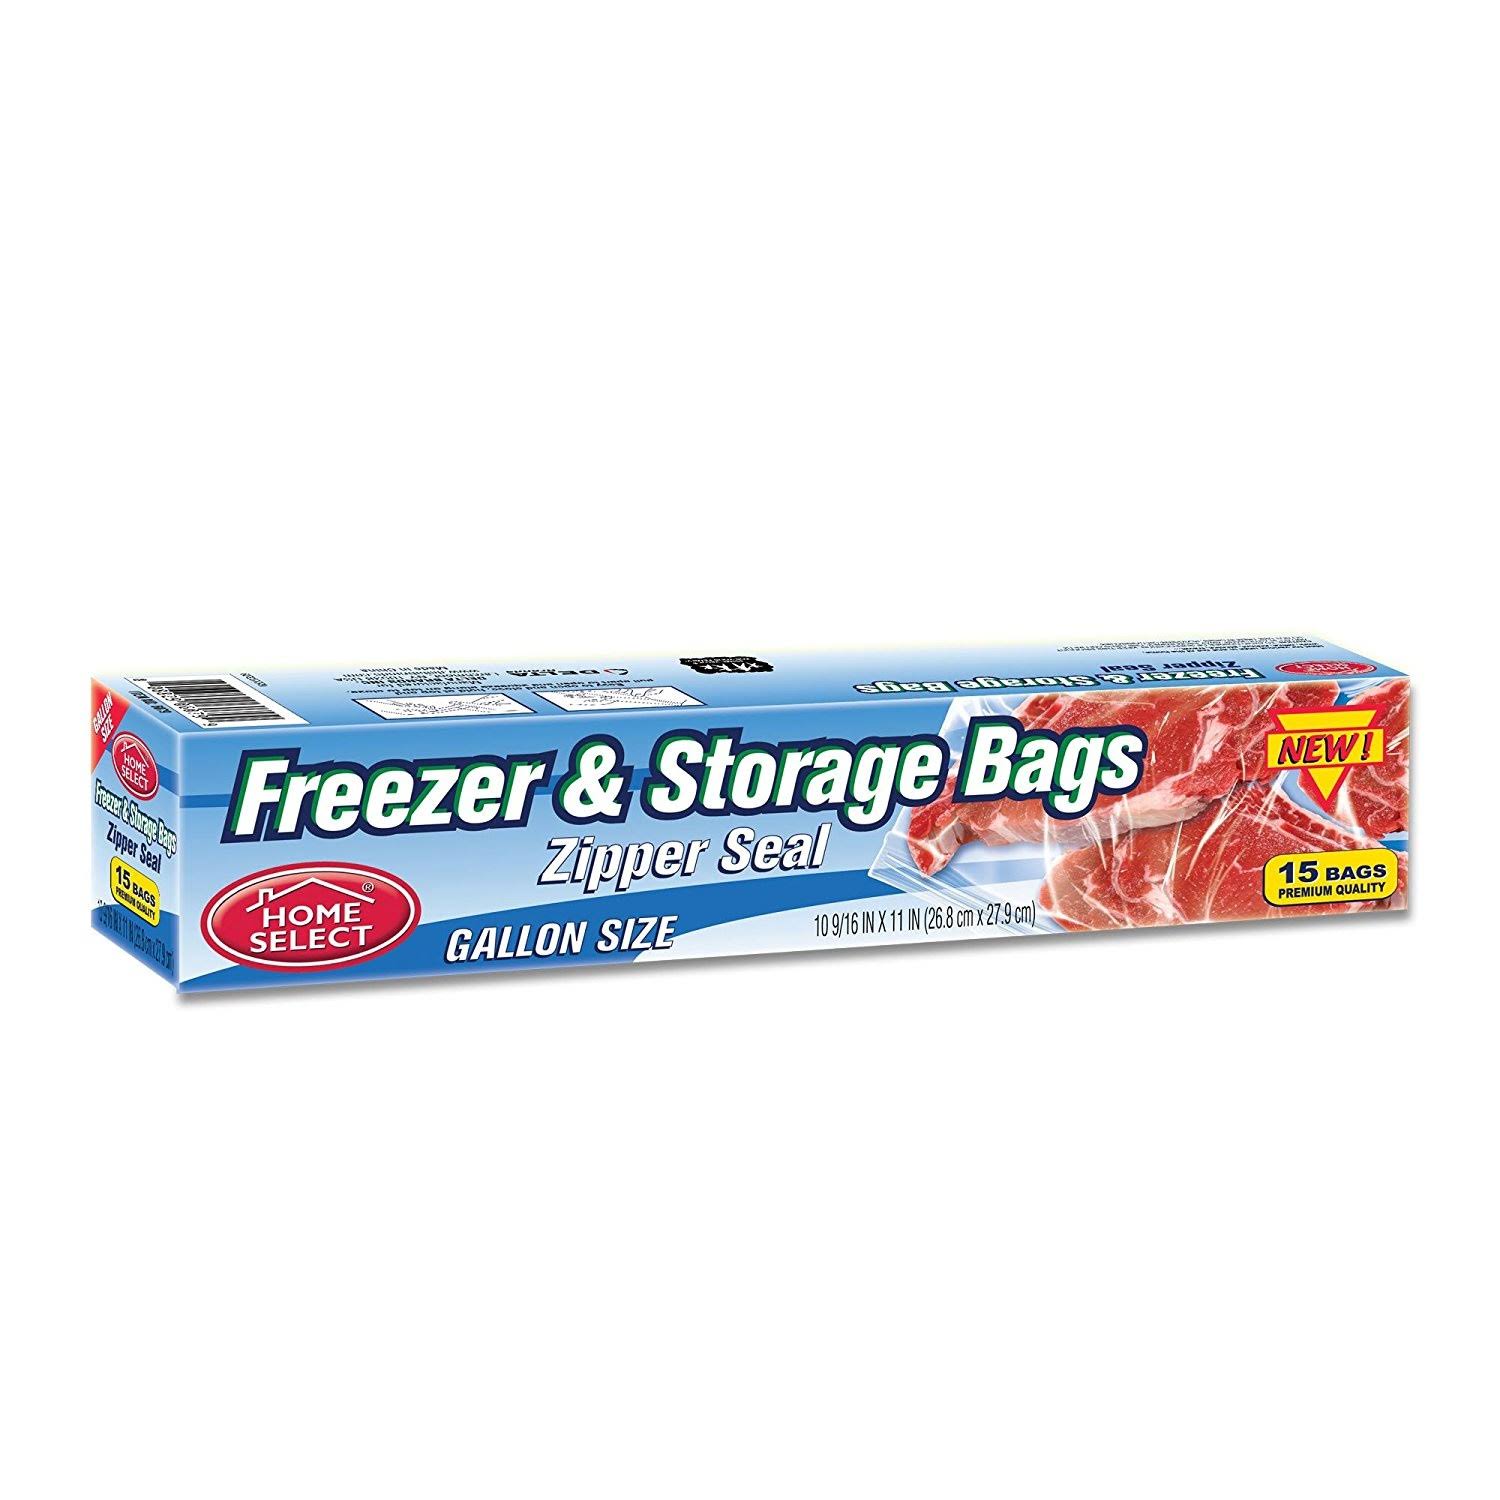 Home Select Freezer & Storage Bags - 15 Bags